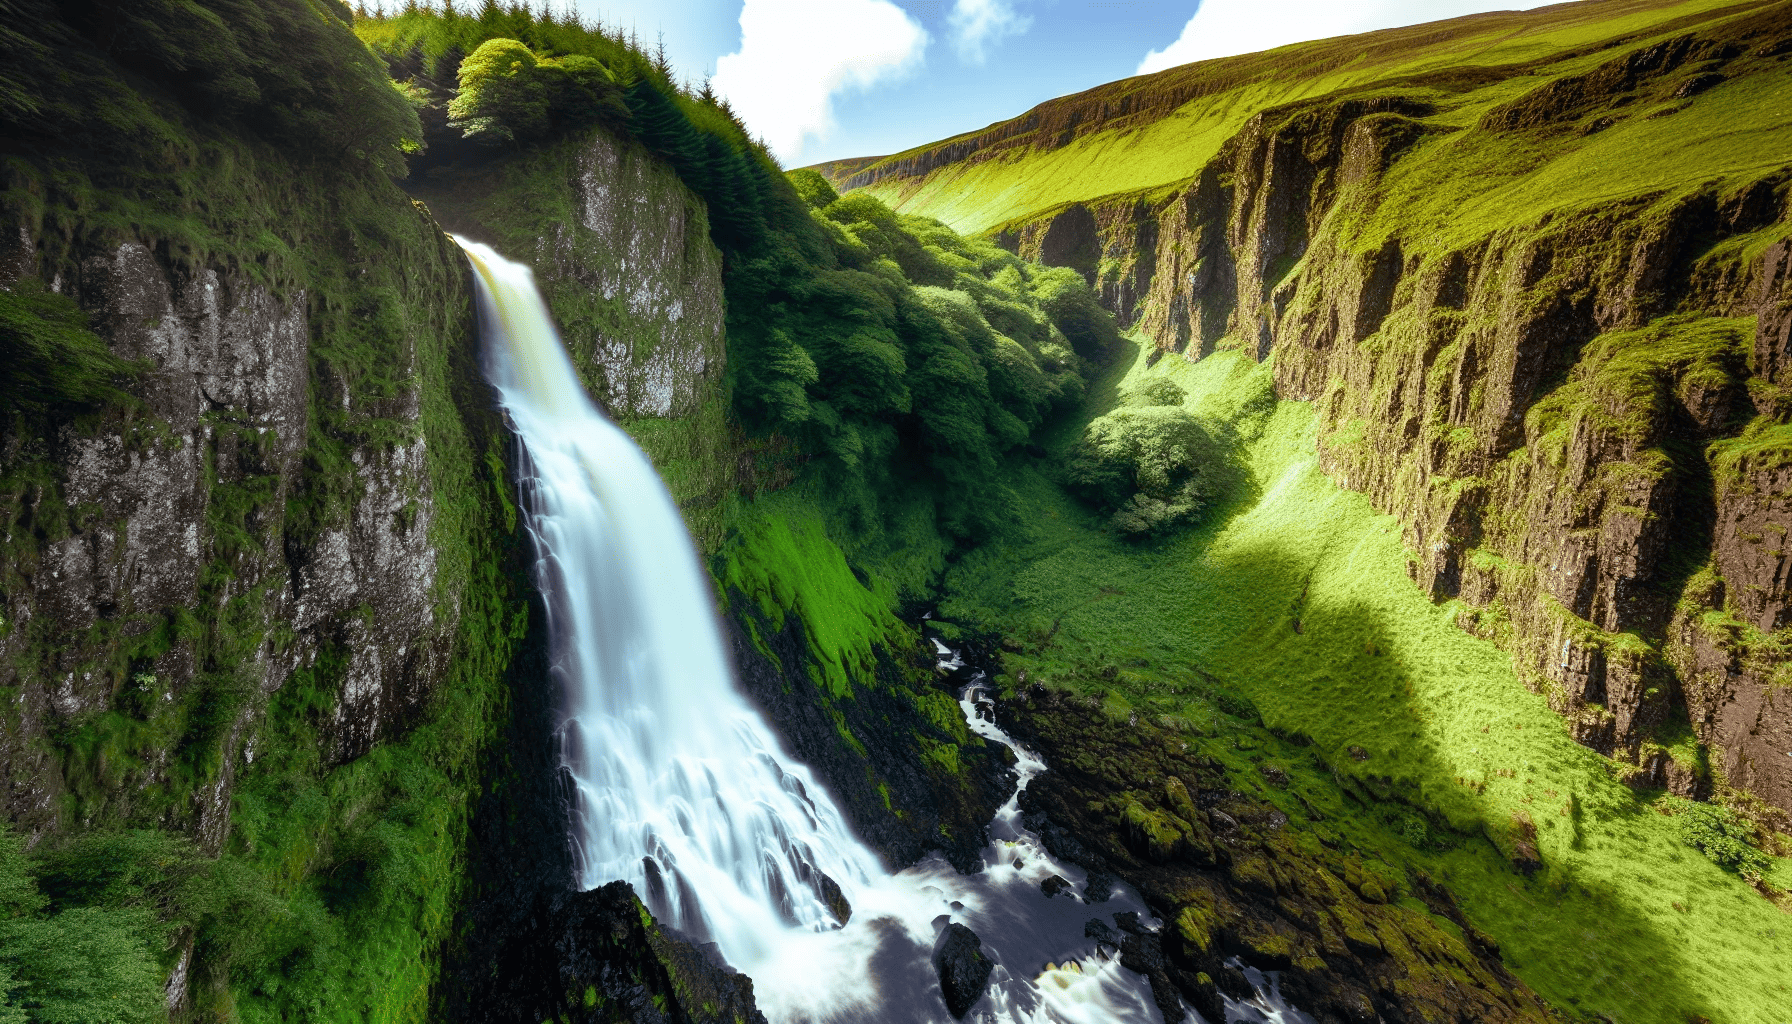 Majestic waterfall in Glenariff, the Queen of the Glens in Antrim